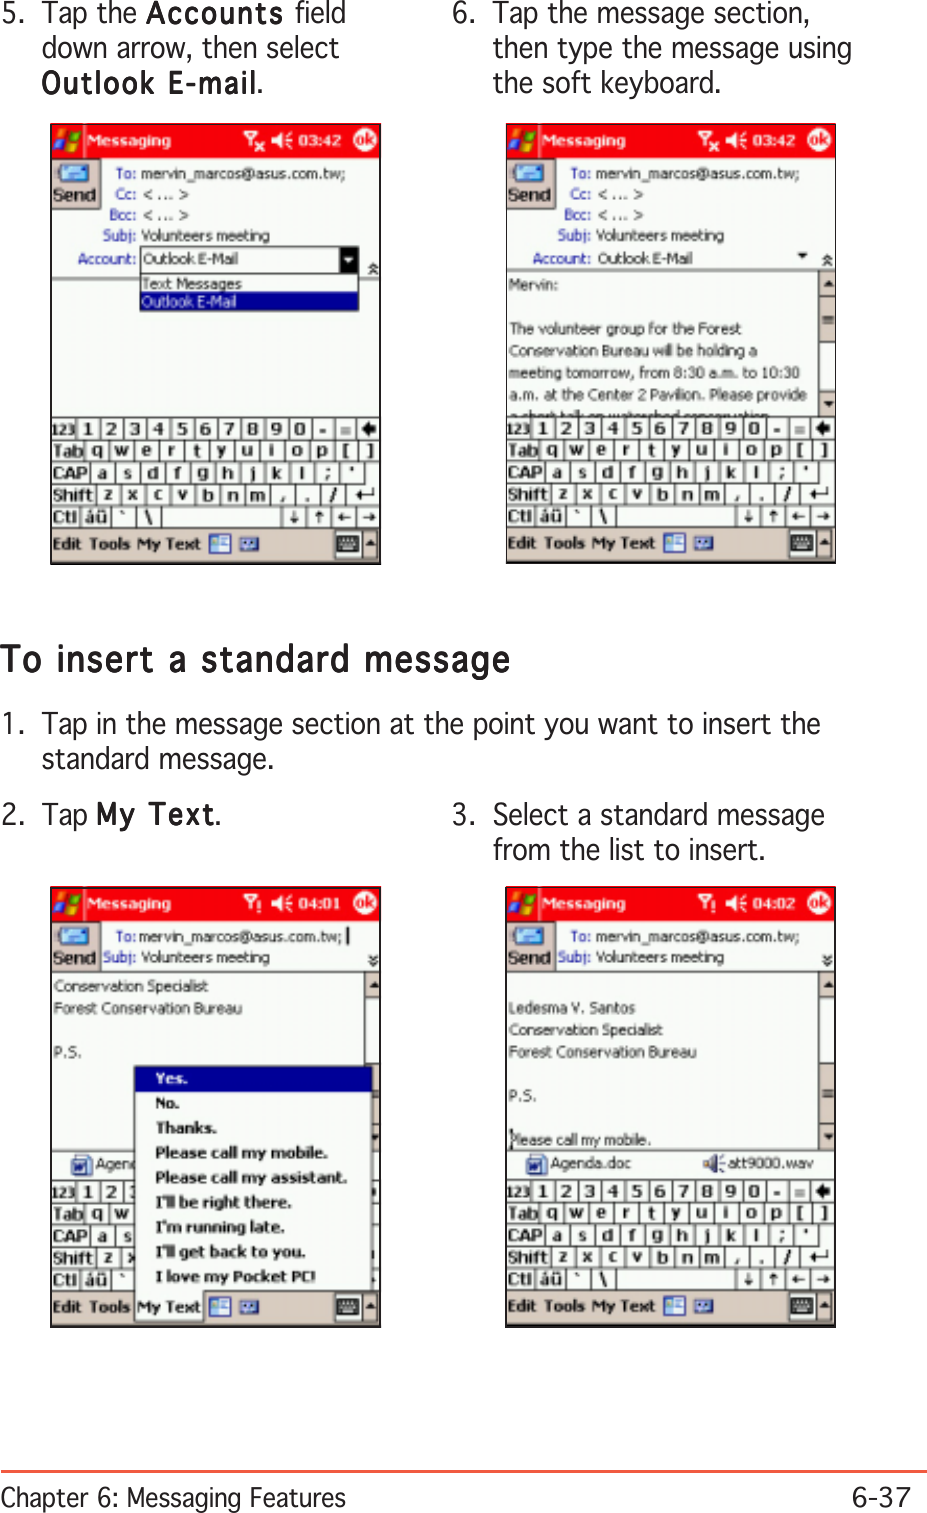 Chapter 6: Messaging Features6-376. Tap the message section,then type the message usingthe soft keyboard.To insert a standard messageTo insert a standard messageTo insert a standard messageTo insert a standard messageTo insert a standard message1. Tap in the message section at the point you want to insert thestandard message.2. Tap My TextMy TextMy TextMy TextMy Text.5. Tap the AccountsAccountsAccountsAccountsAccounts fielddown arrow, then selectOutlook E-mailOutlook E-mailOutlook E-mailOutlook E-mailOutlook E-mail.3. Select a standard messagefrom the list to insert.